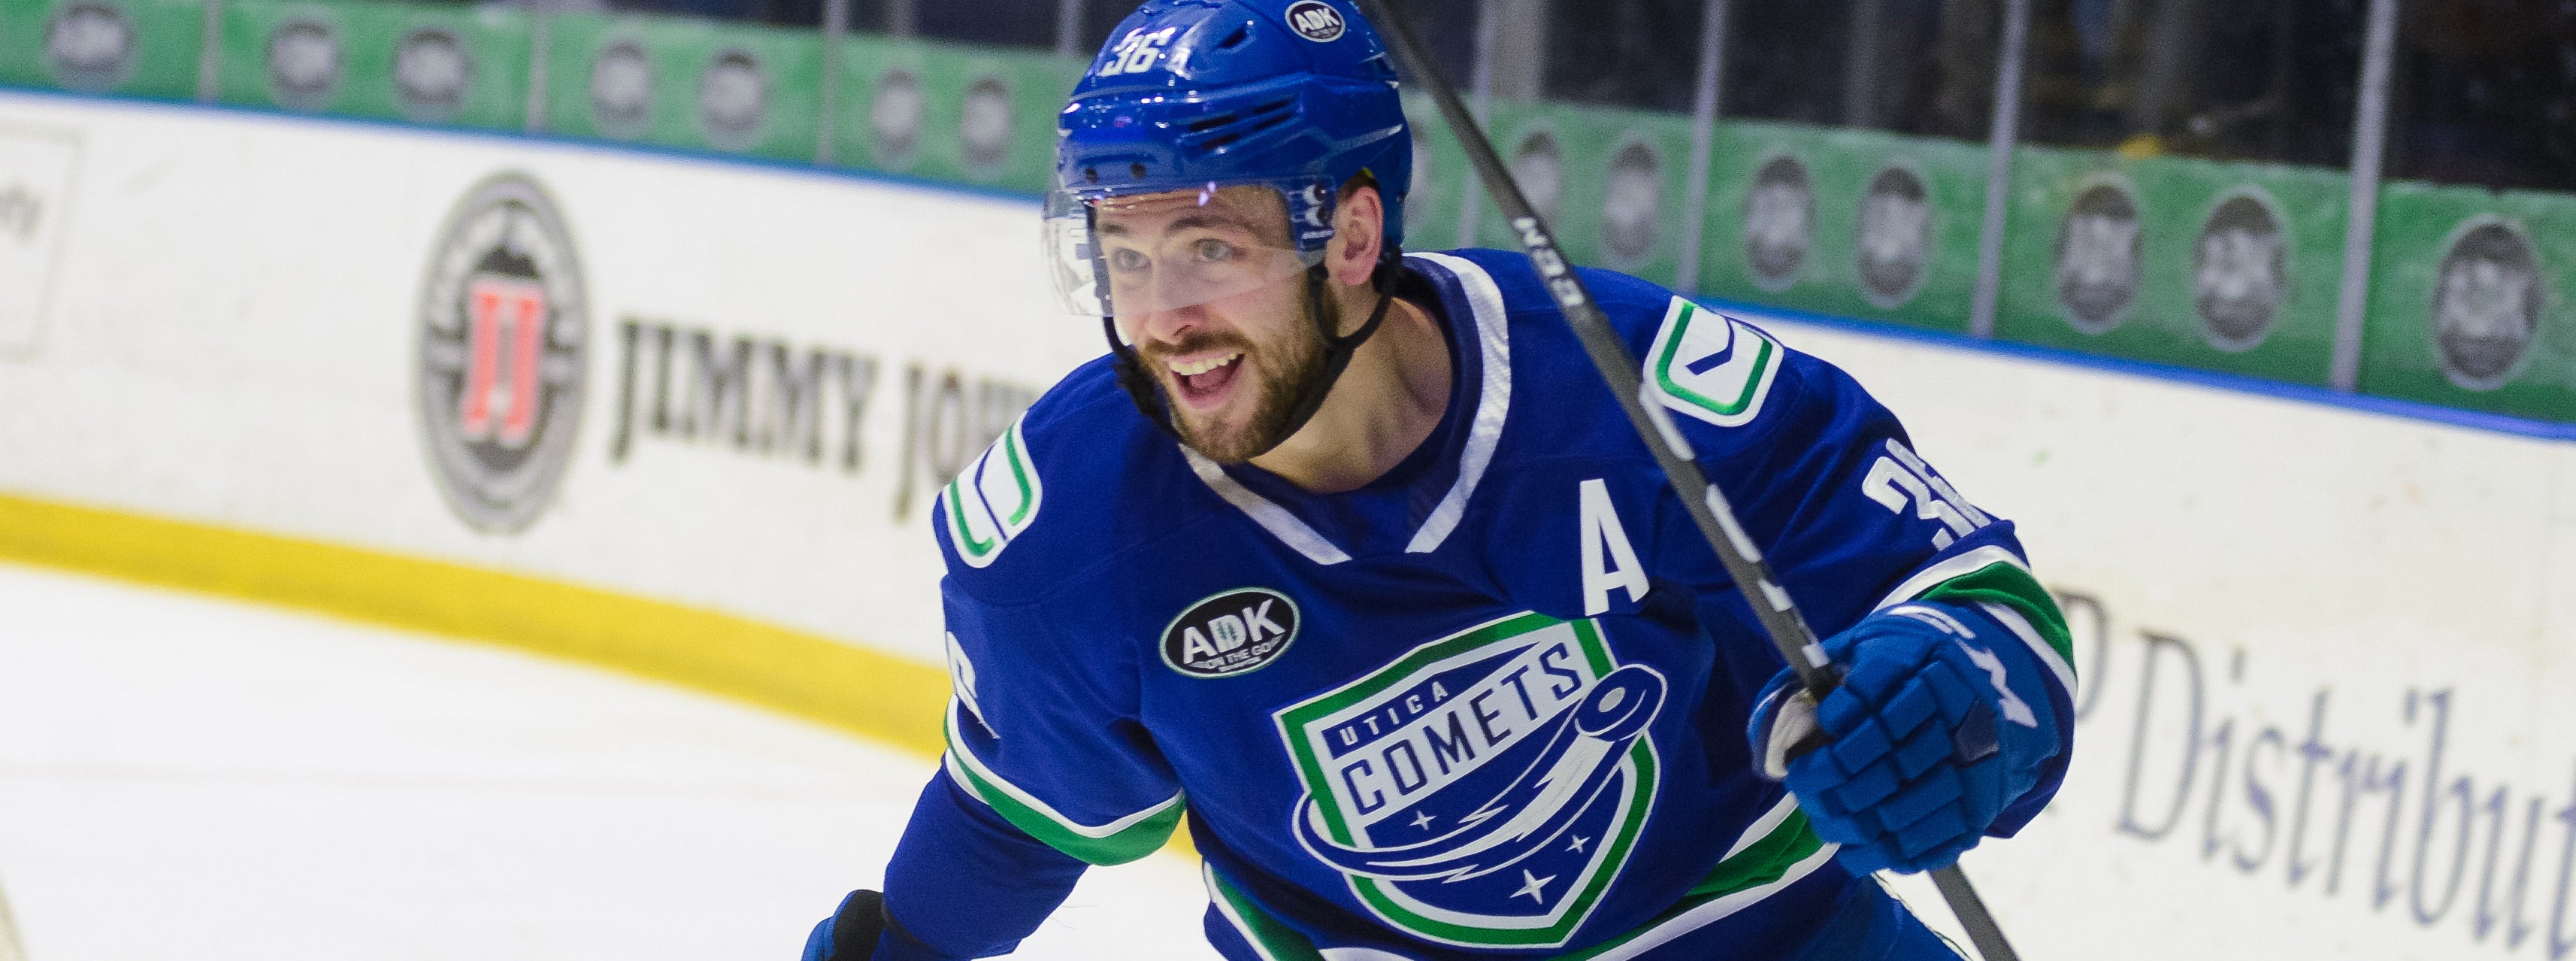 BOUCHER'S FIVE-POINT NIGHT CARRIES COMETS PAST MARLIES